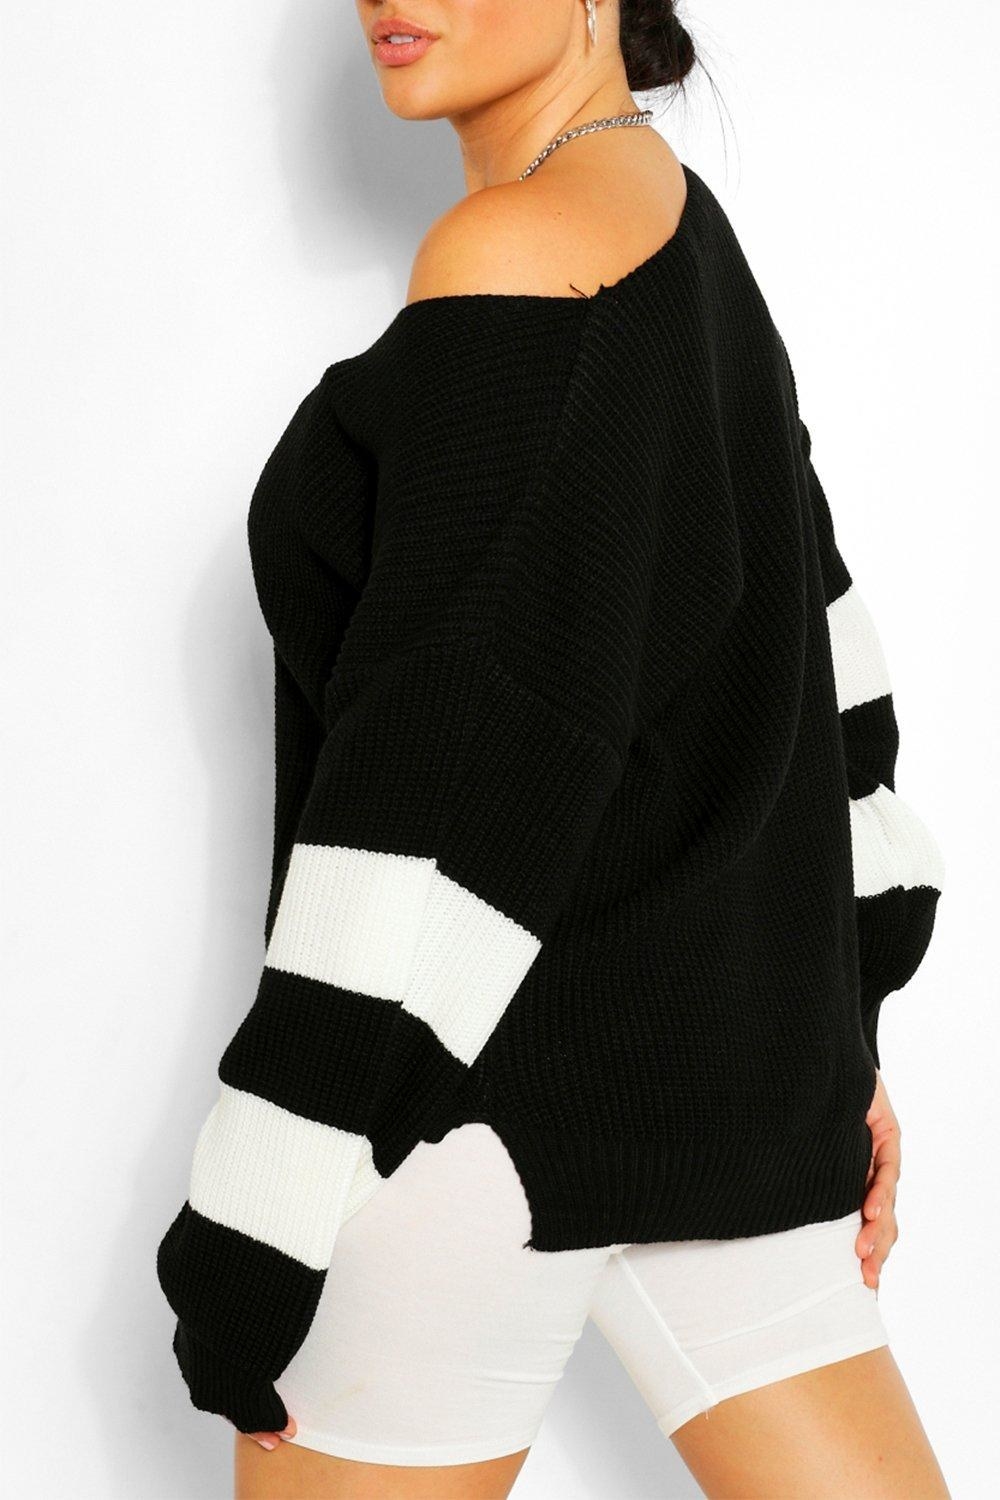 model wear knit sweater with white stripes on the sleeves